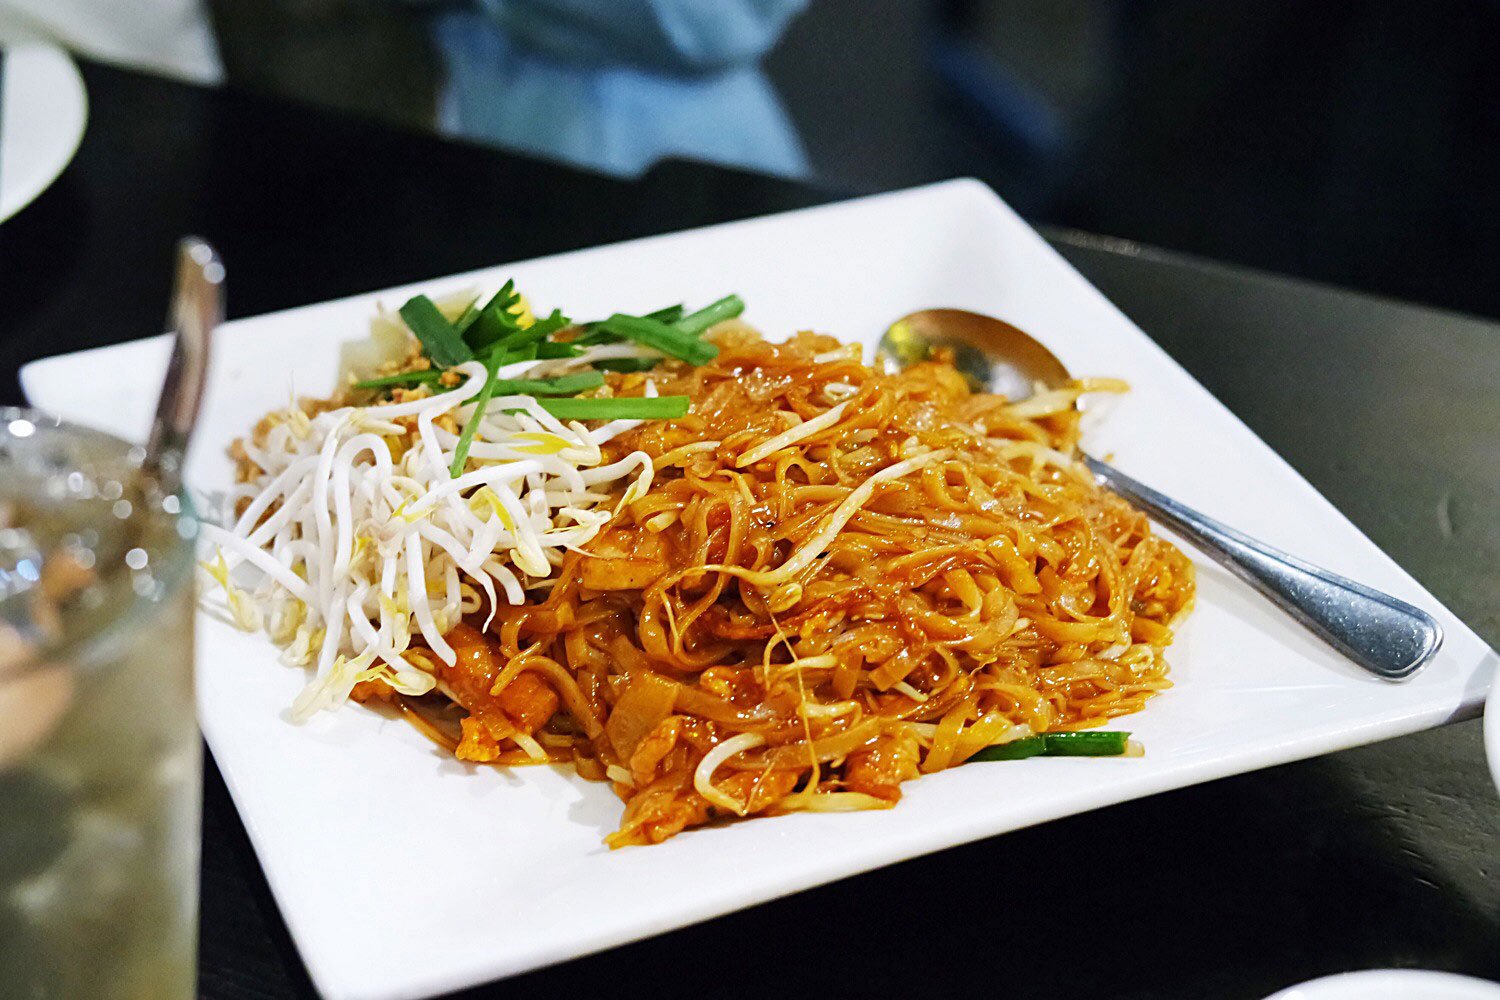 Rice stick noodles are stir fried with radish, sauce and chicken. Served with a side of chopped peanuts and fresh bean sprouts.